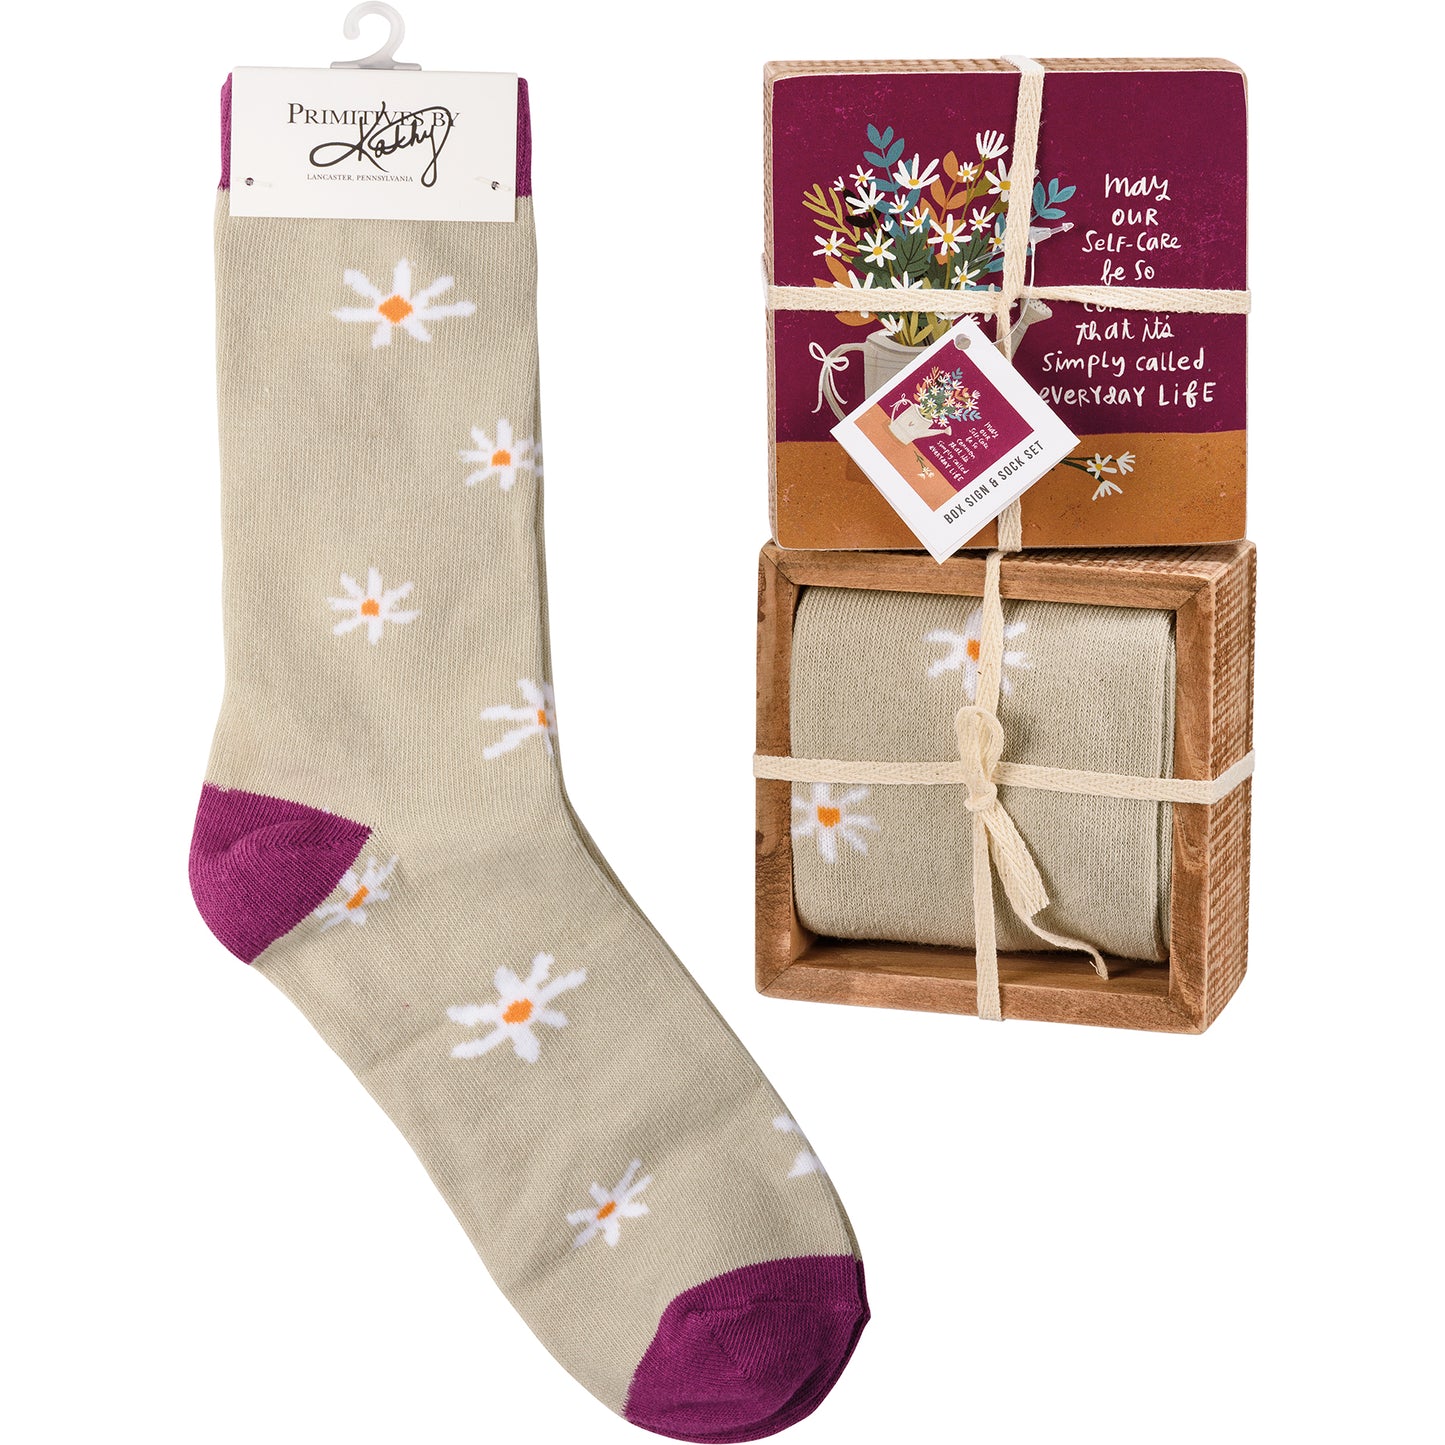 Simply Called Everyday Life Box Sign and Sock Set